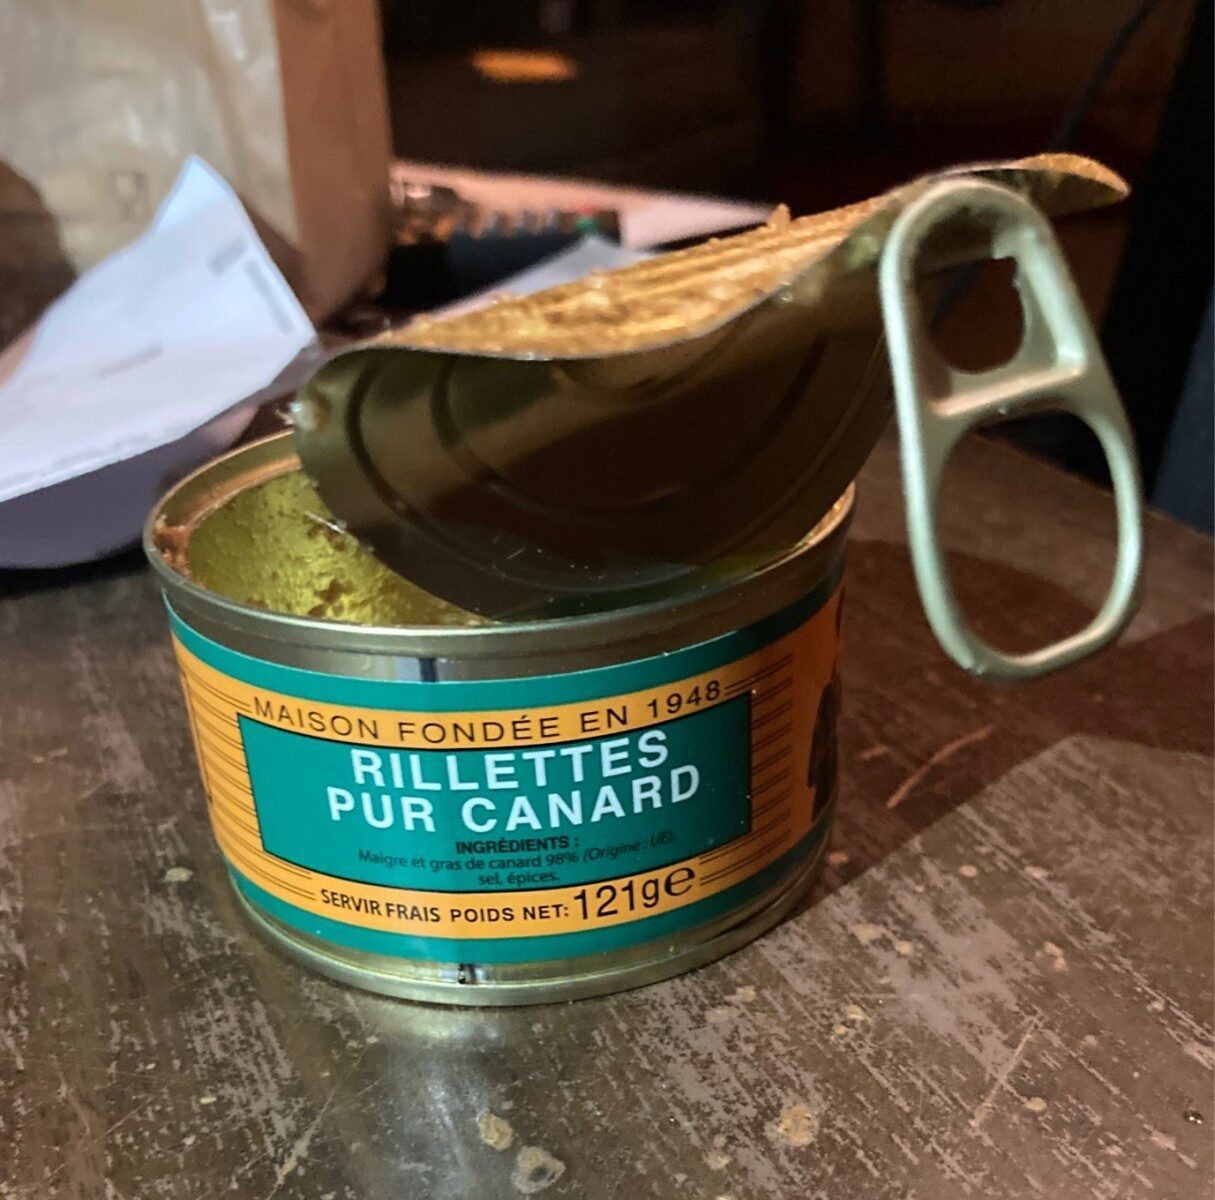 Rillettes pur canard - Nutrition facts - fr